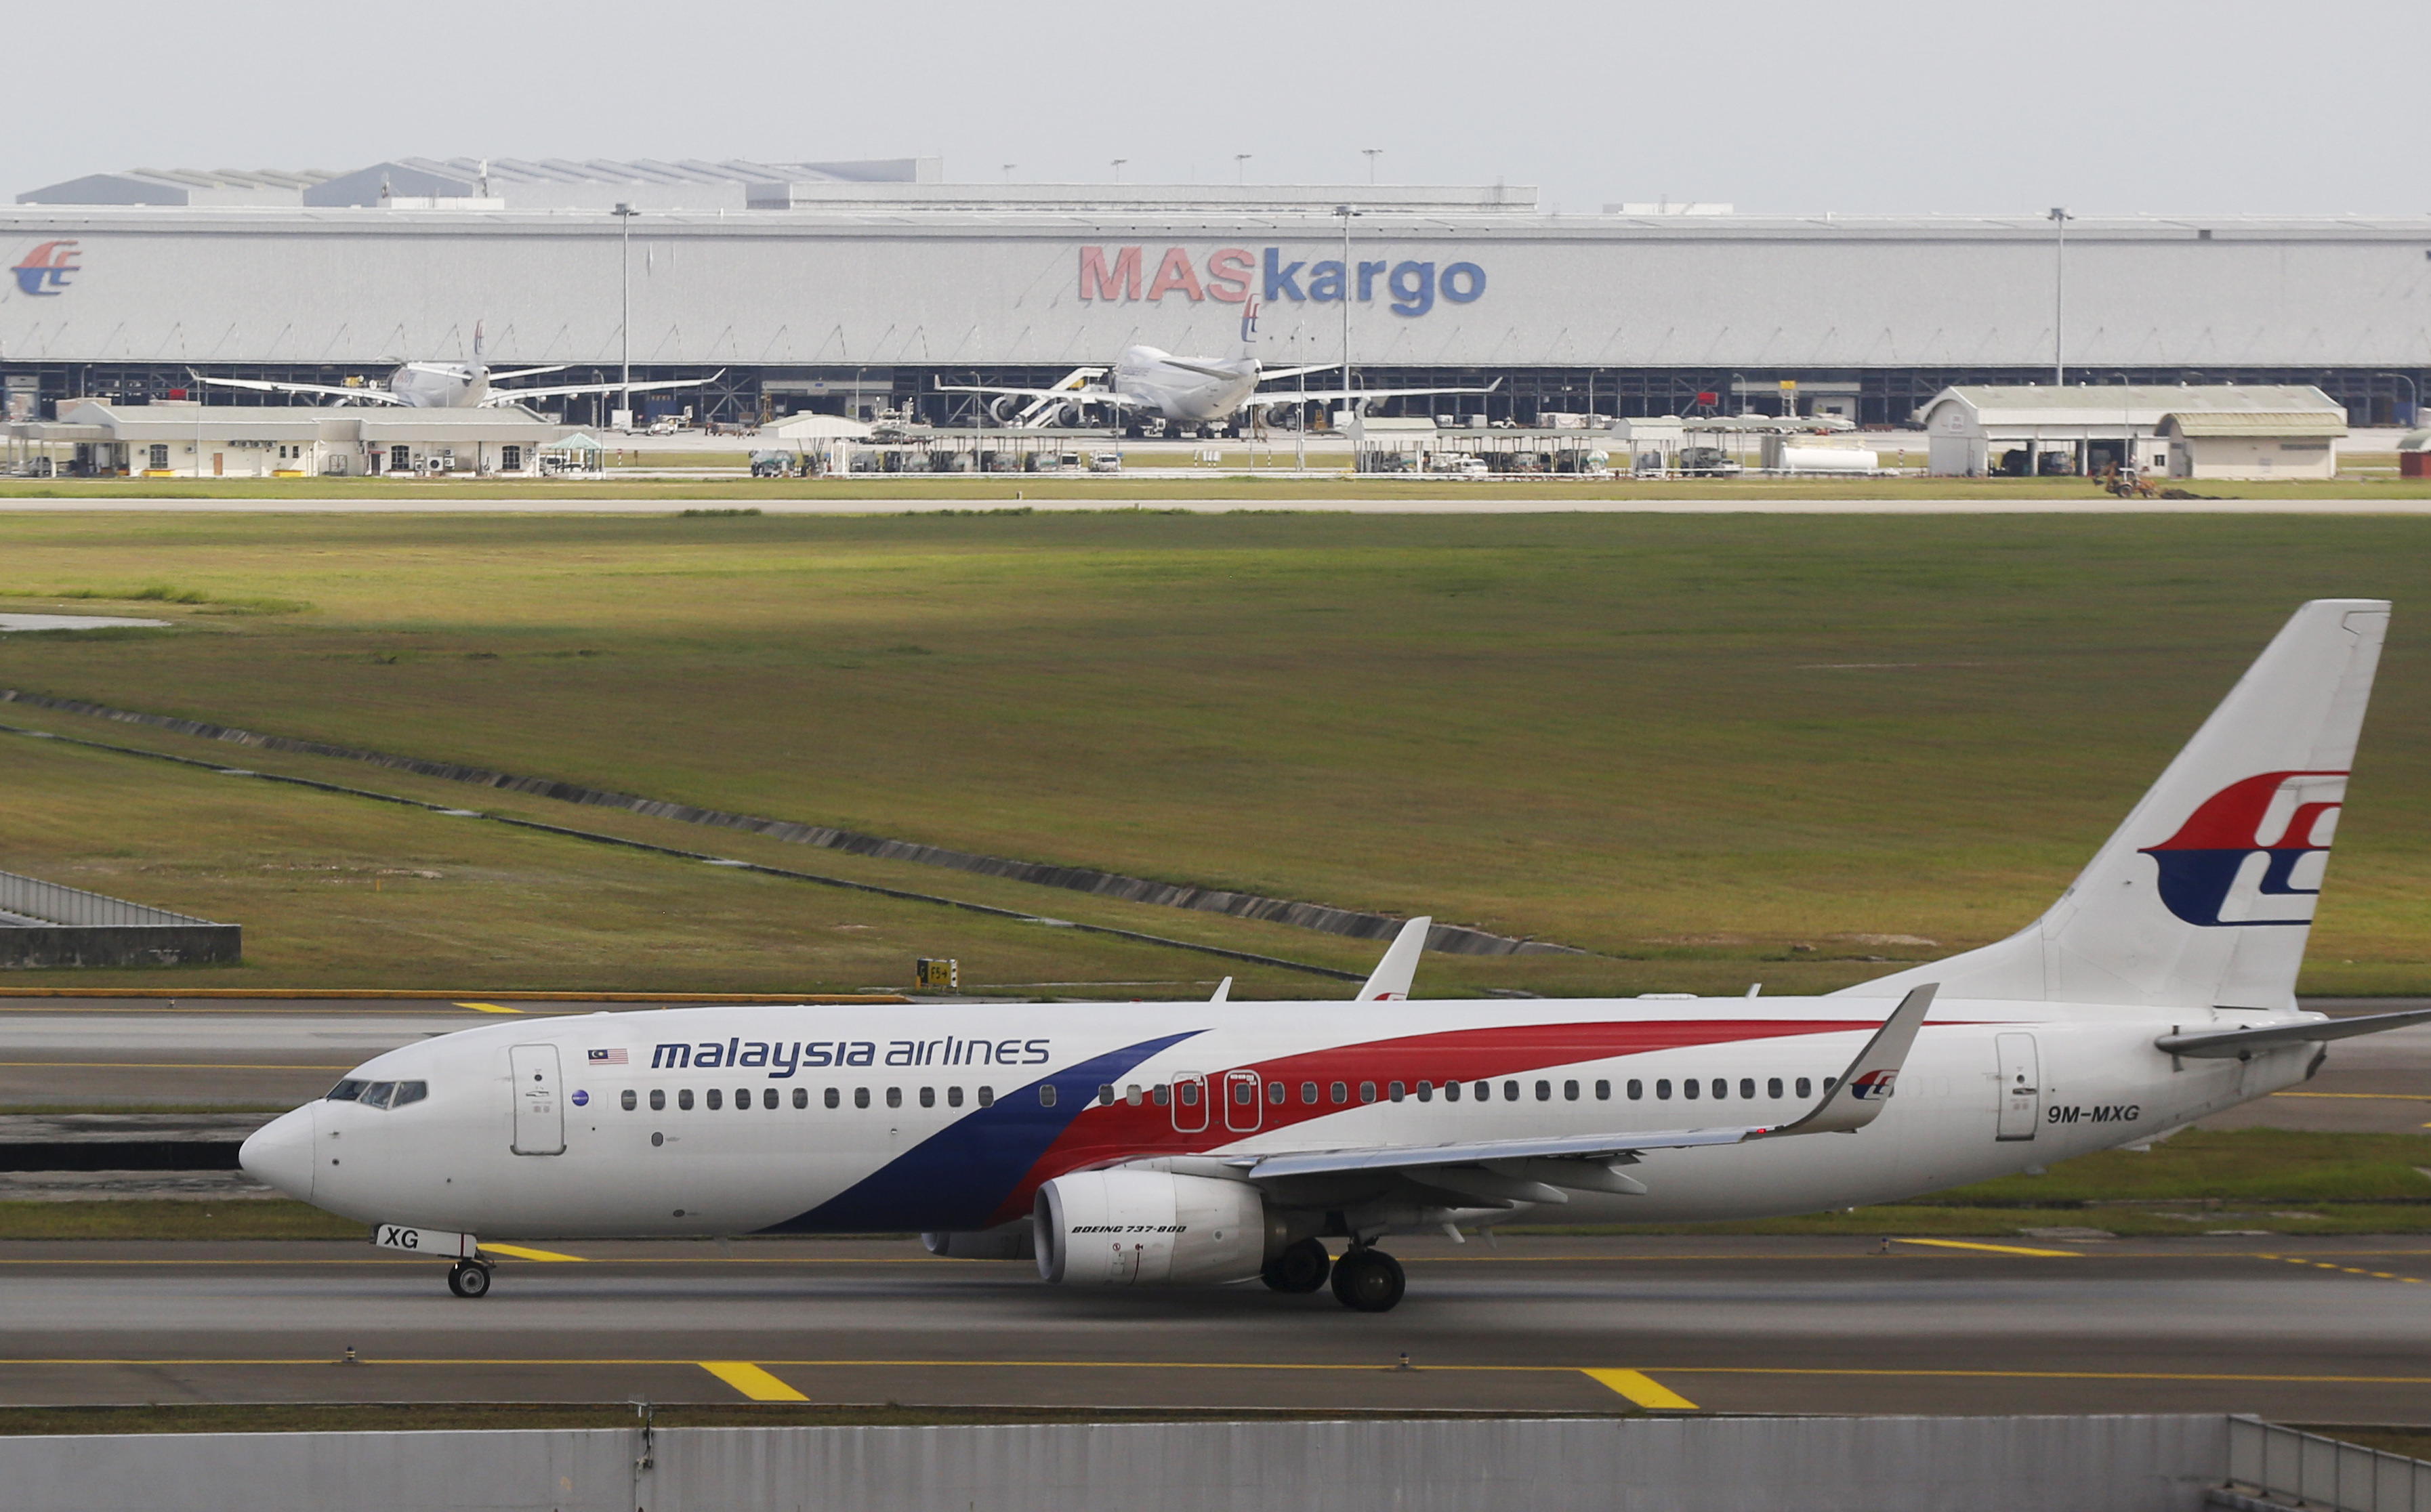 Malaysia Airlines will be first to track all of its flights globally in